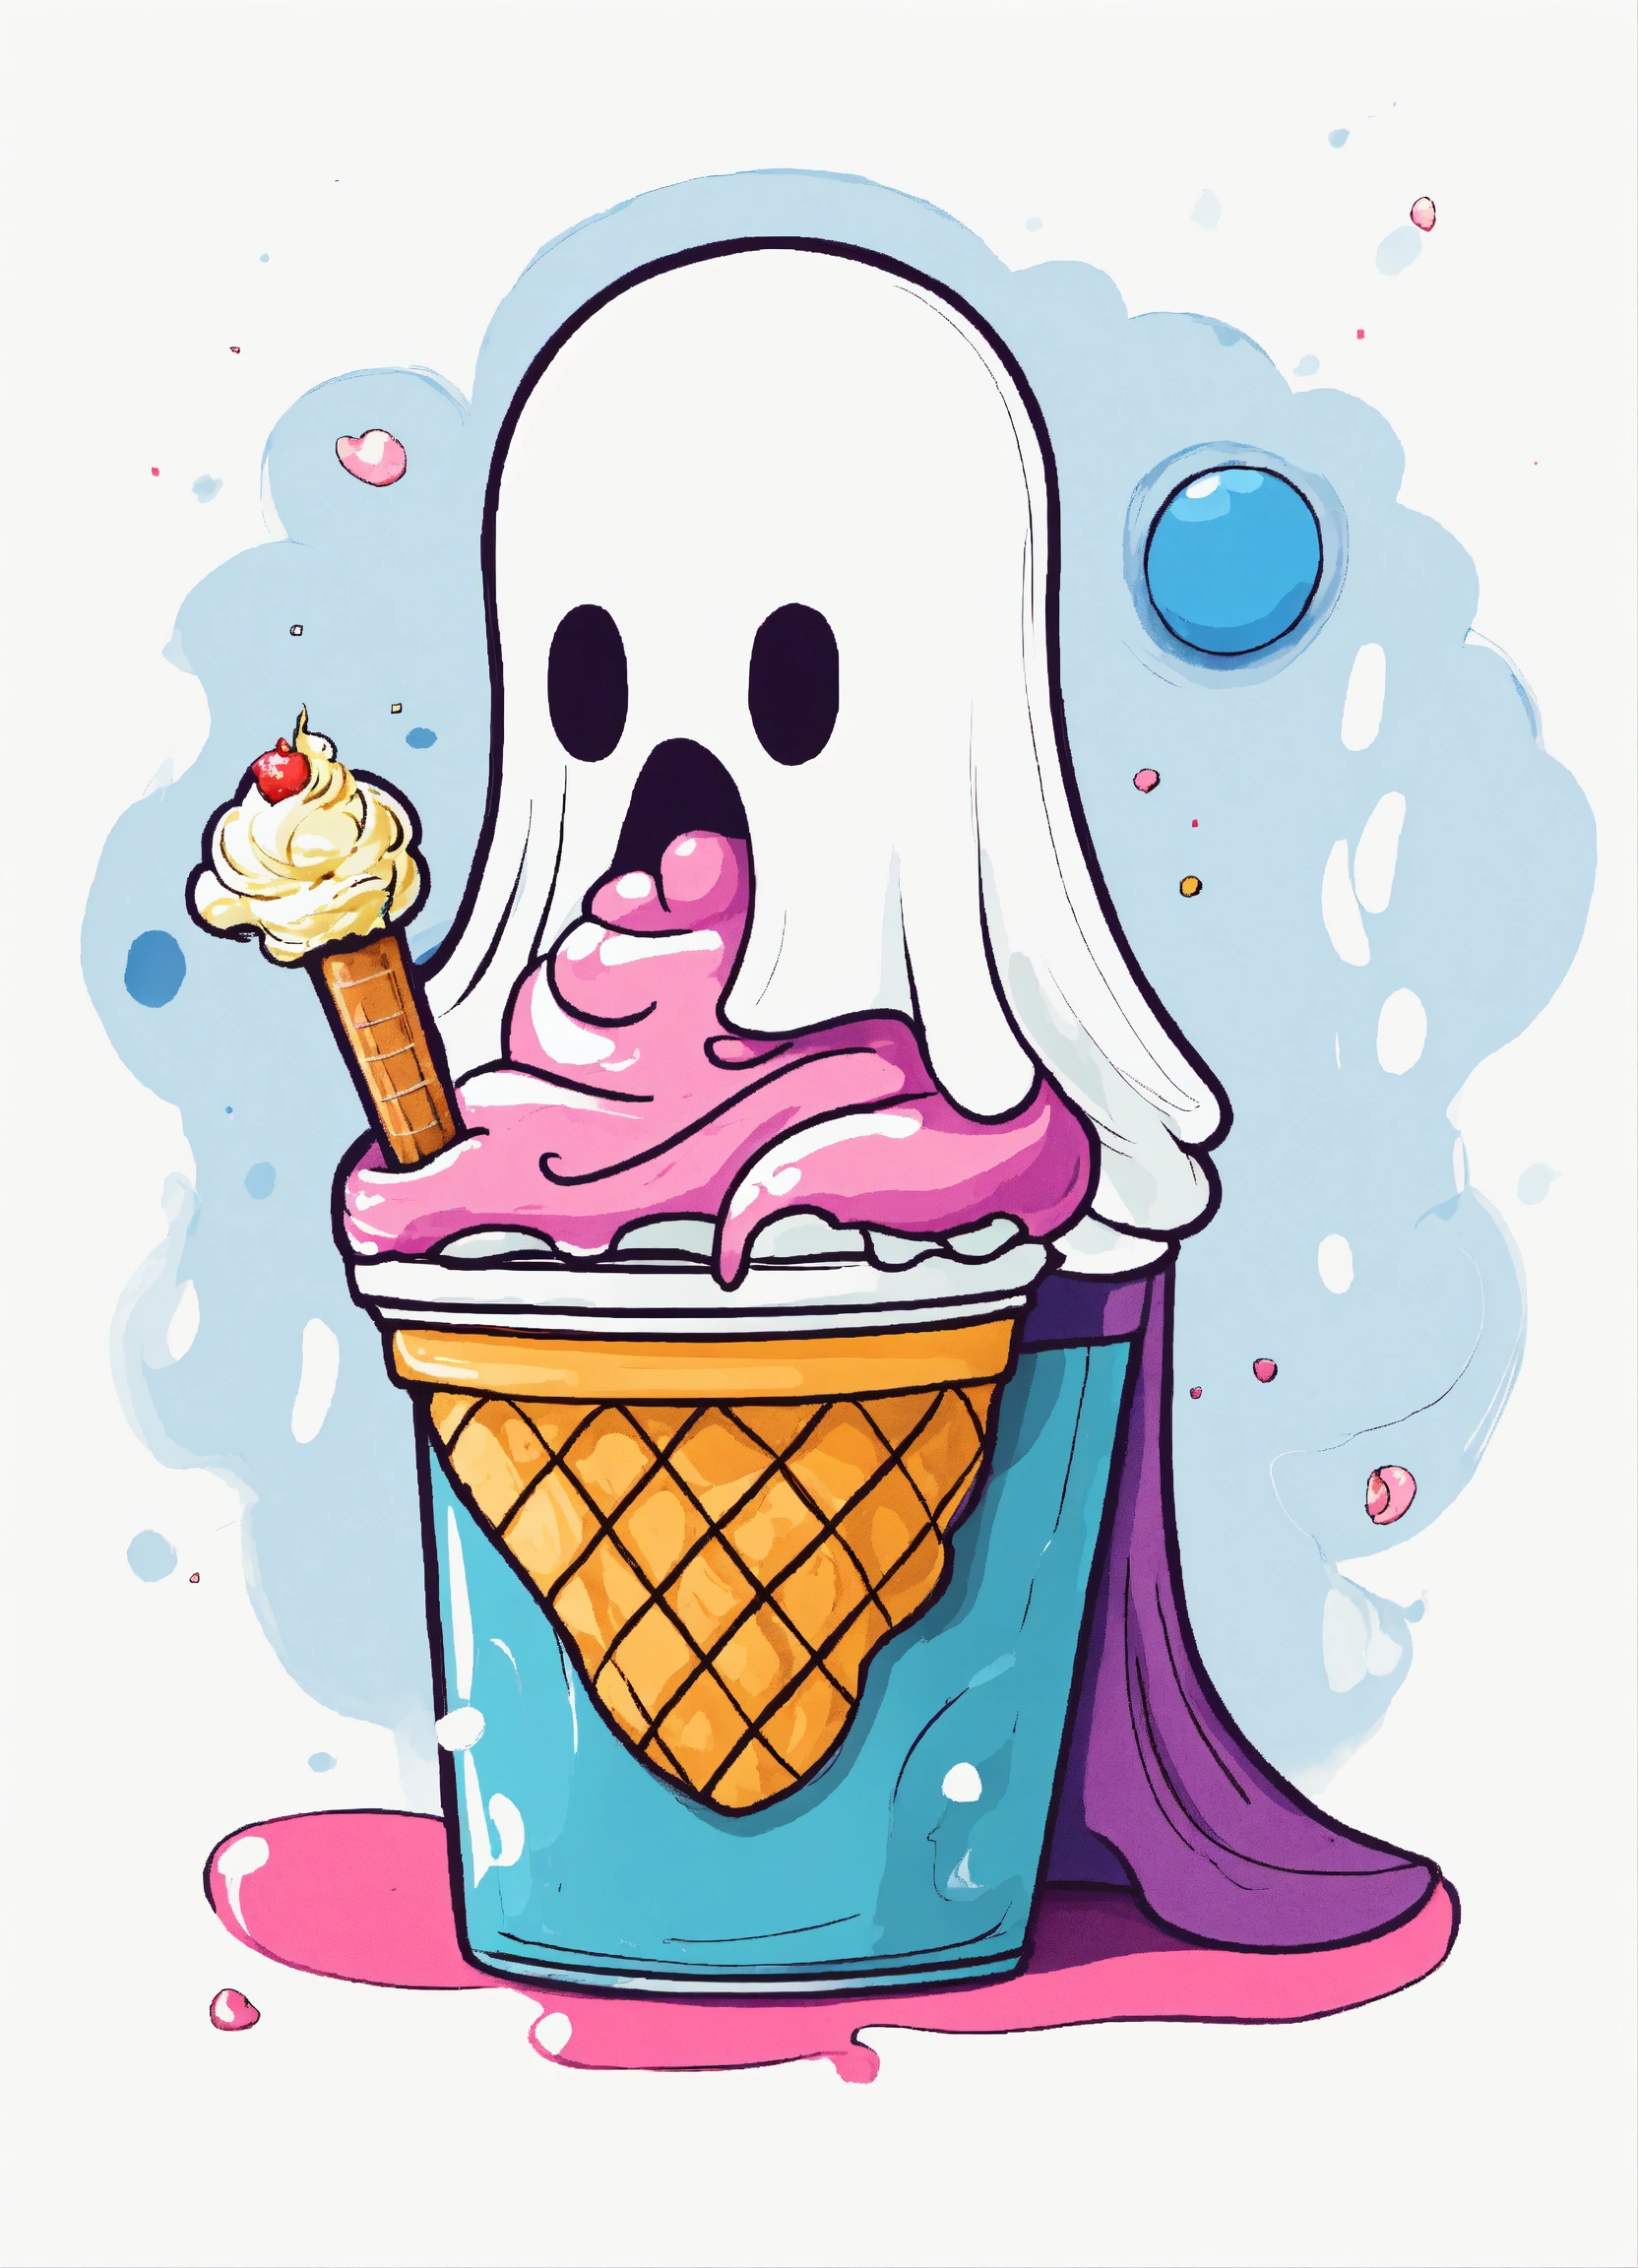 Lexica - Simple ghost eating ice cream doodle png white background